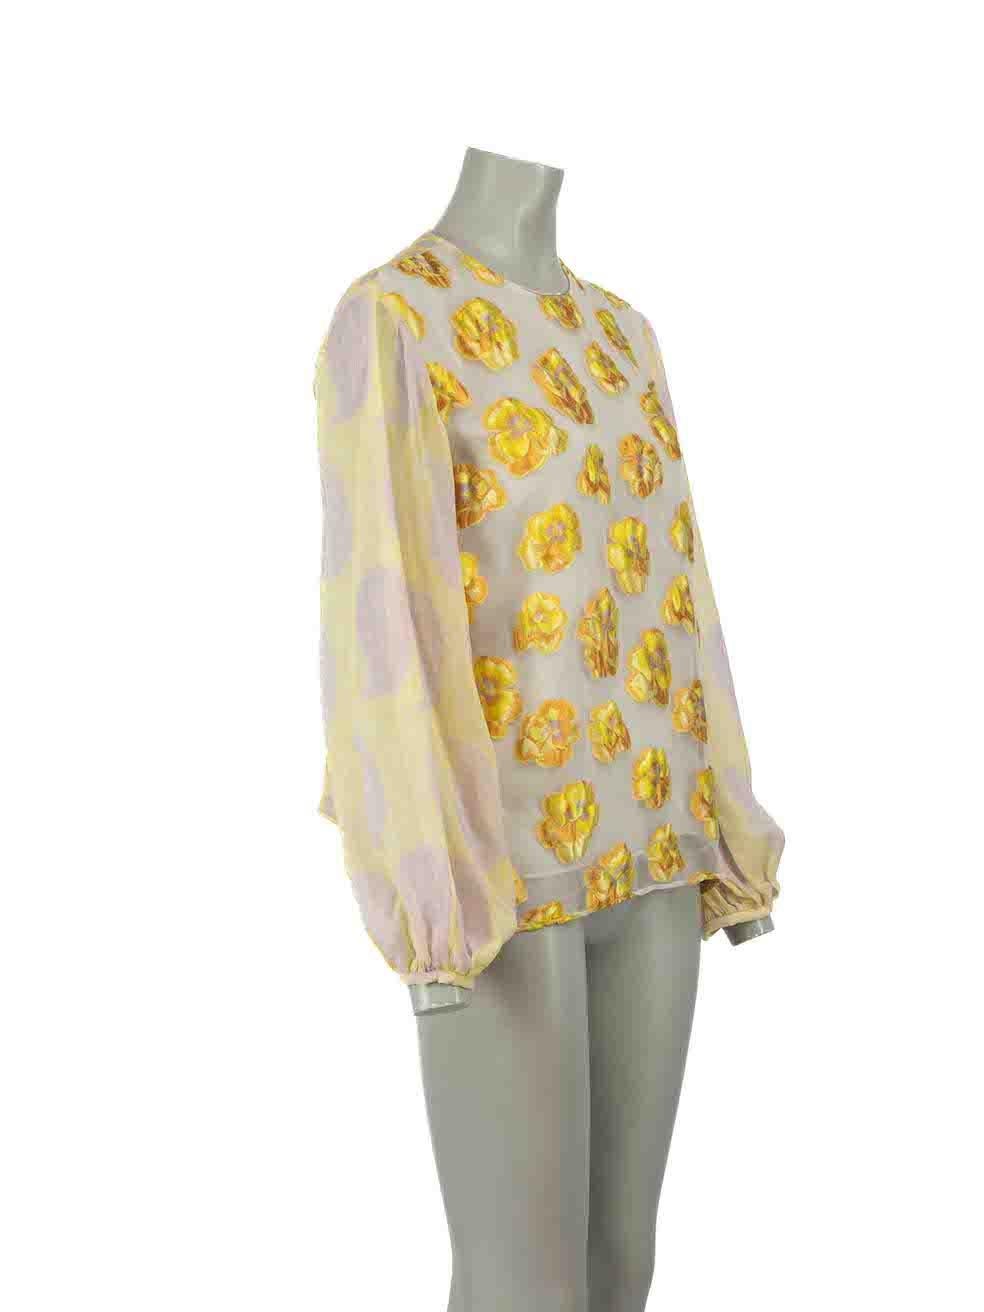 CONDITION is Very good. Hardly any visible wear to top is evident on this used Giambattista Valli designer resale item.
 
Details
Yellow
Polyester
Long sleeves top
Floral embroidered accent
Sheer
Round neckline
Back button closure
 
Made in Italy
